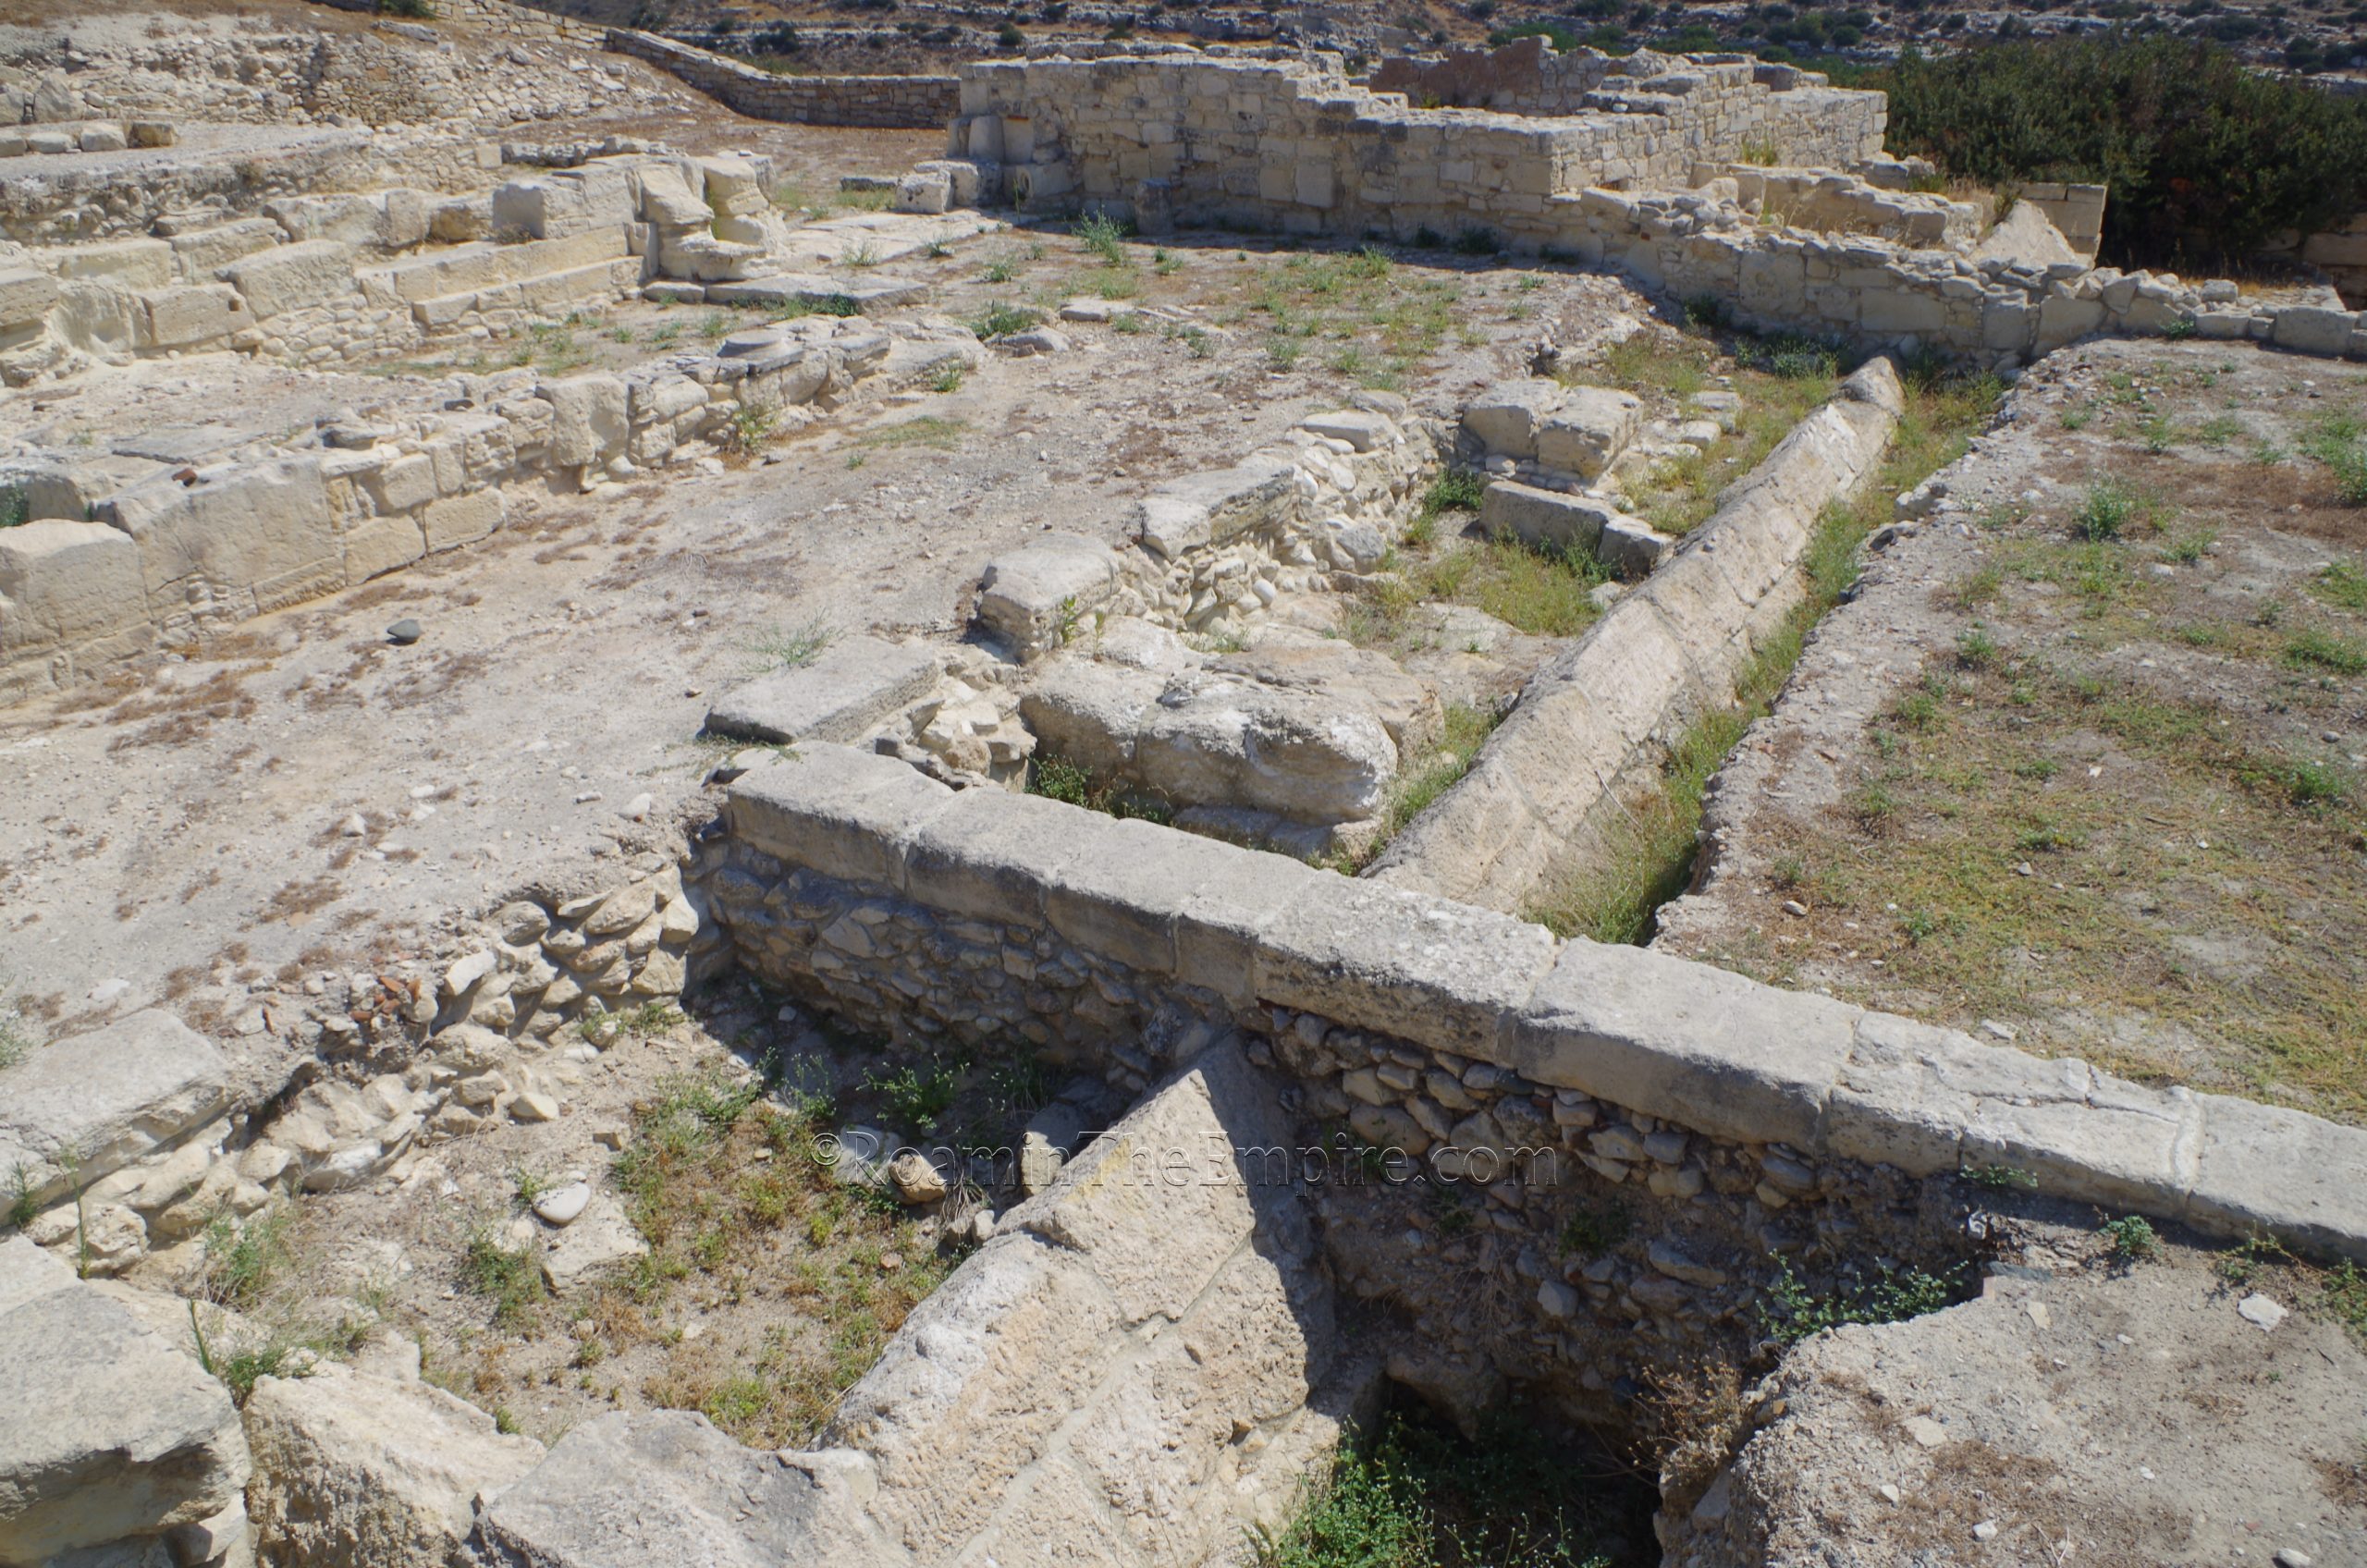 Remains of the pyramidal structure east of the nymphaeum.